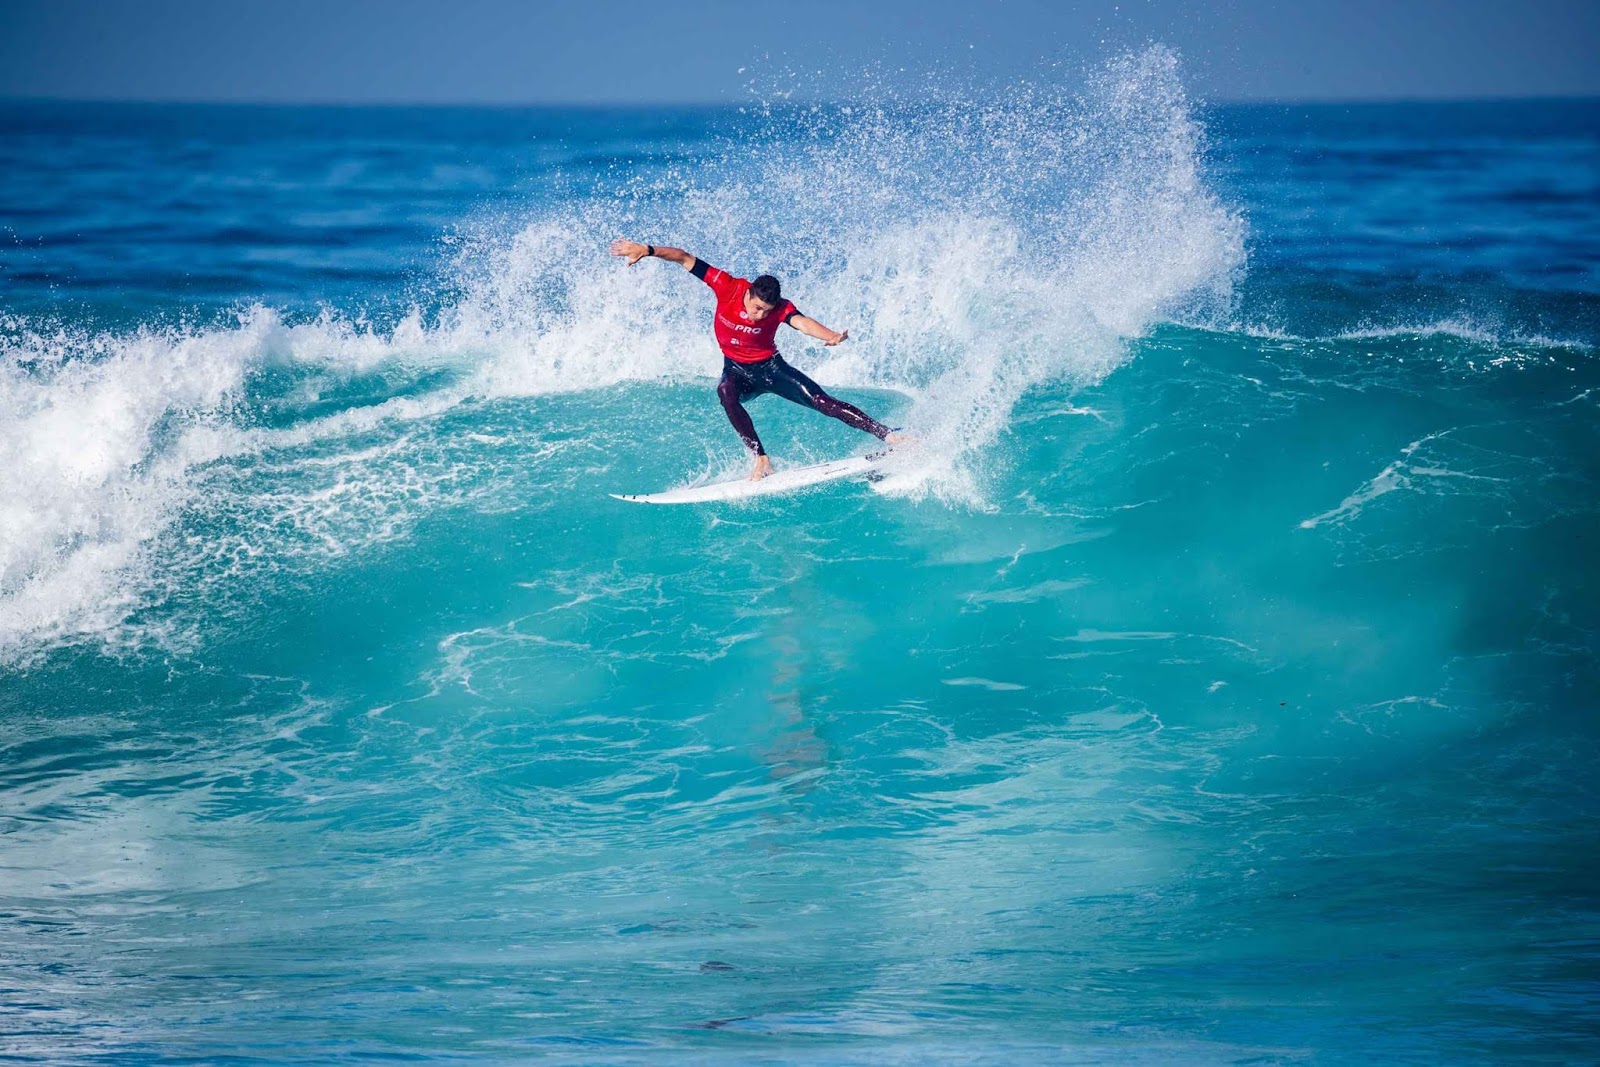 2019 Cabreiroá Las Americas Pro Tenerife Highlights Epic Second Day of Action in Tenerife